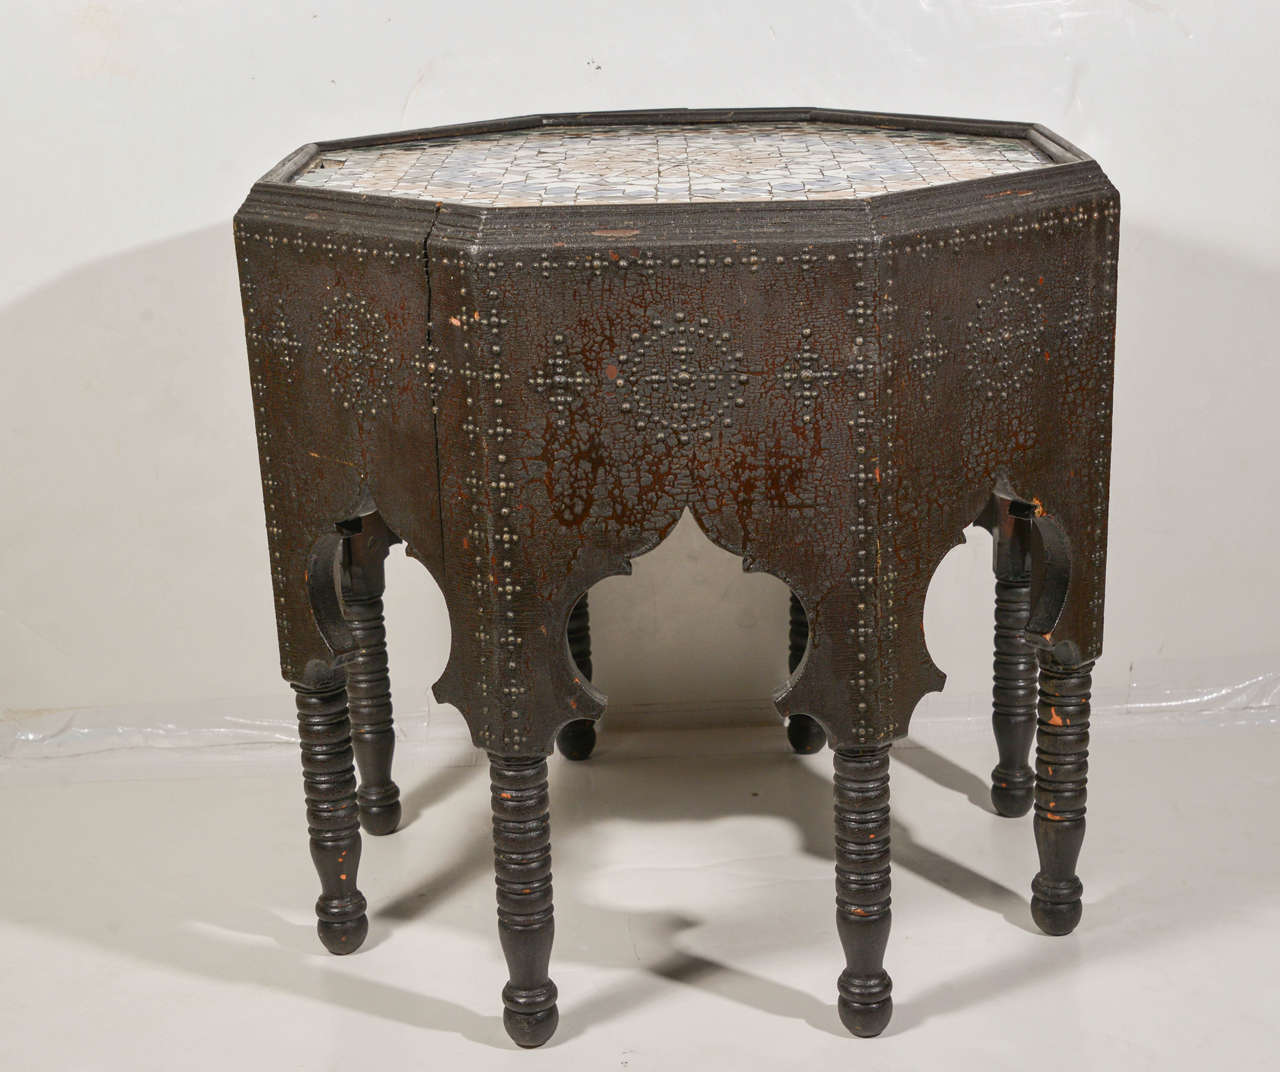 Antique Continental Moorish Style Octagonal-shaped End Table with mosaic tile top, c. 1890
22